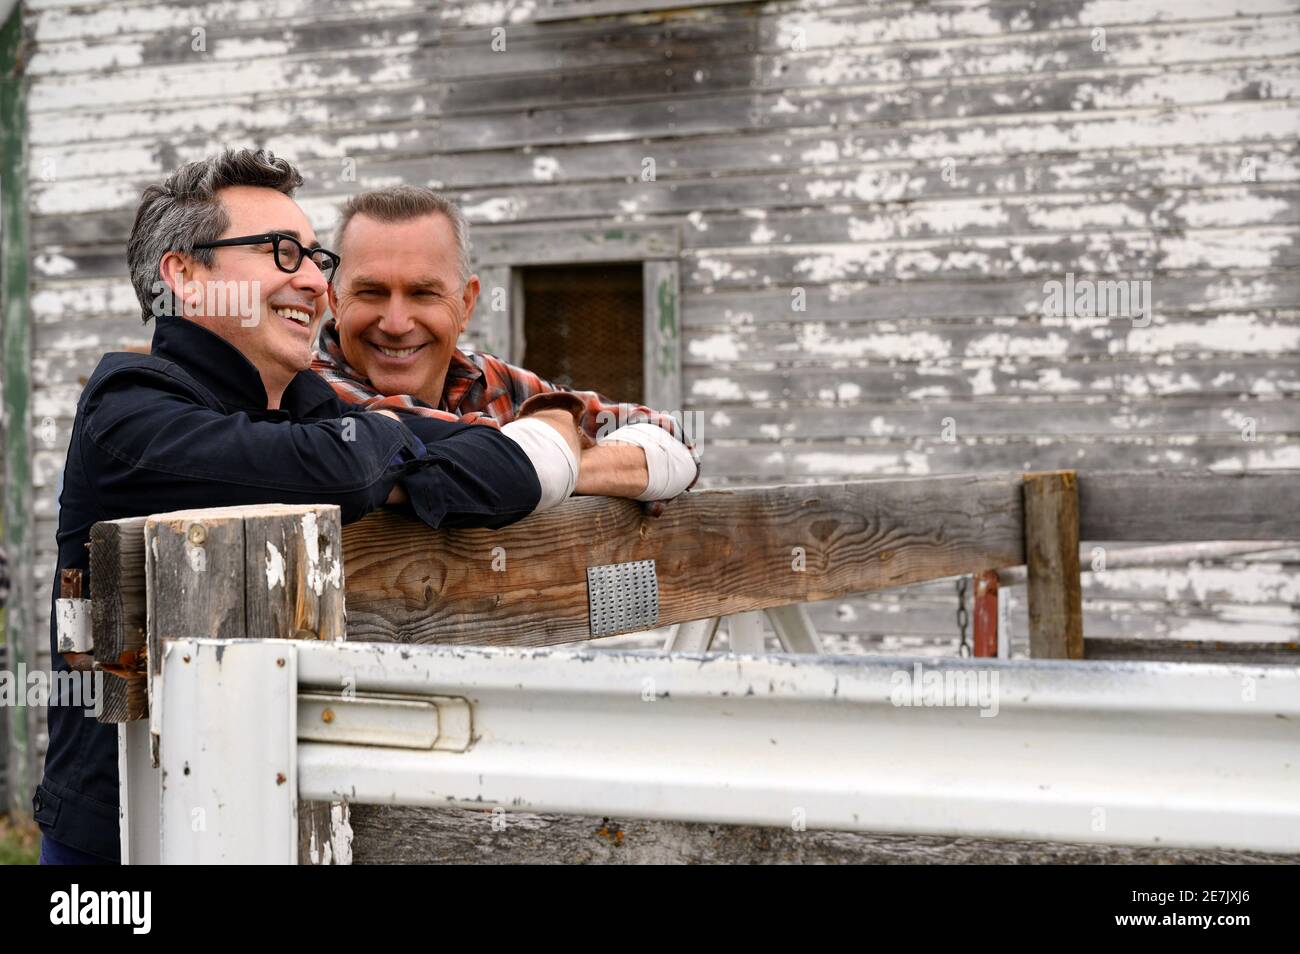 KEVIN COSTNER and THOMAS BEZUCHA in LET HIM GO (2020), directed by THOMAS BEZUCHA. Credit: Mazur / Kaplan Company / Album Stock Photo